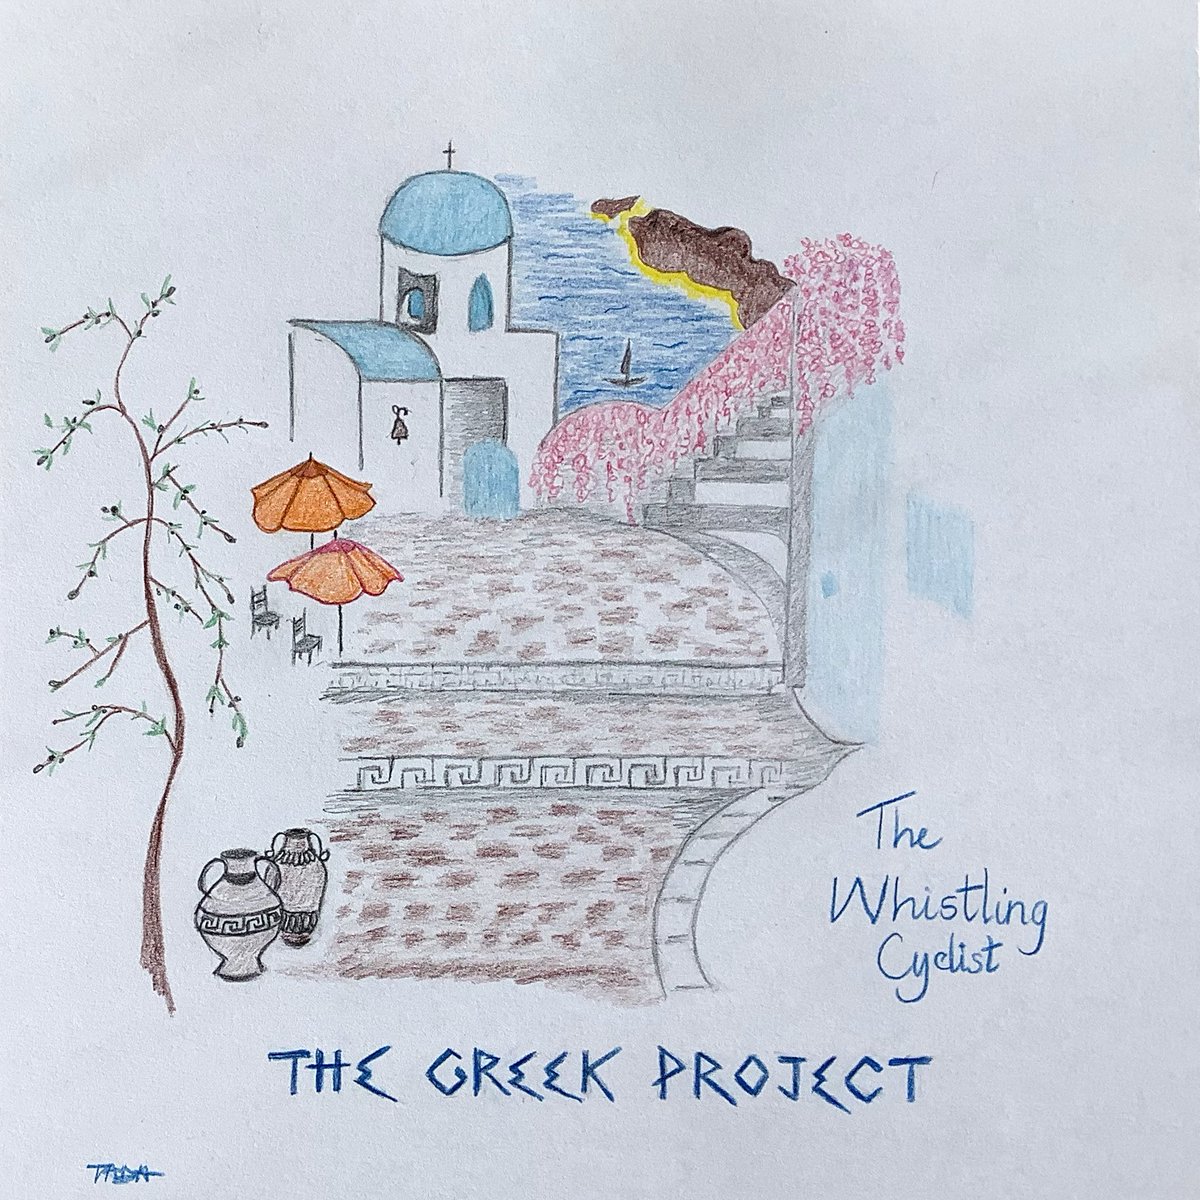 Morning folks, I’m excited 😊 about my new single coming out next week. Fri 3rd May. It’s a guitar🎸 based instrumental called “The Greek Project” in which I’ve tried to capture the essence of Greece. Cheers 👍 #artwork #coverart #indie #film #movie #tv #Greece #indiemusic